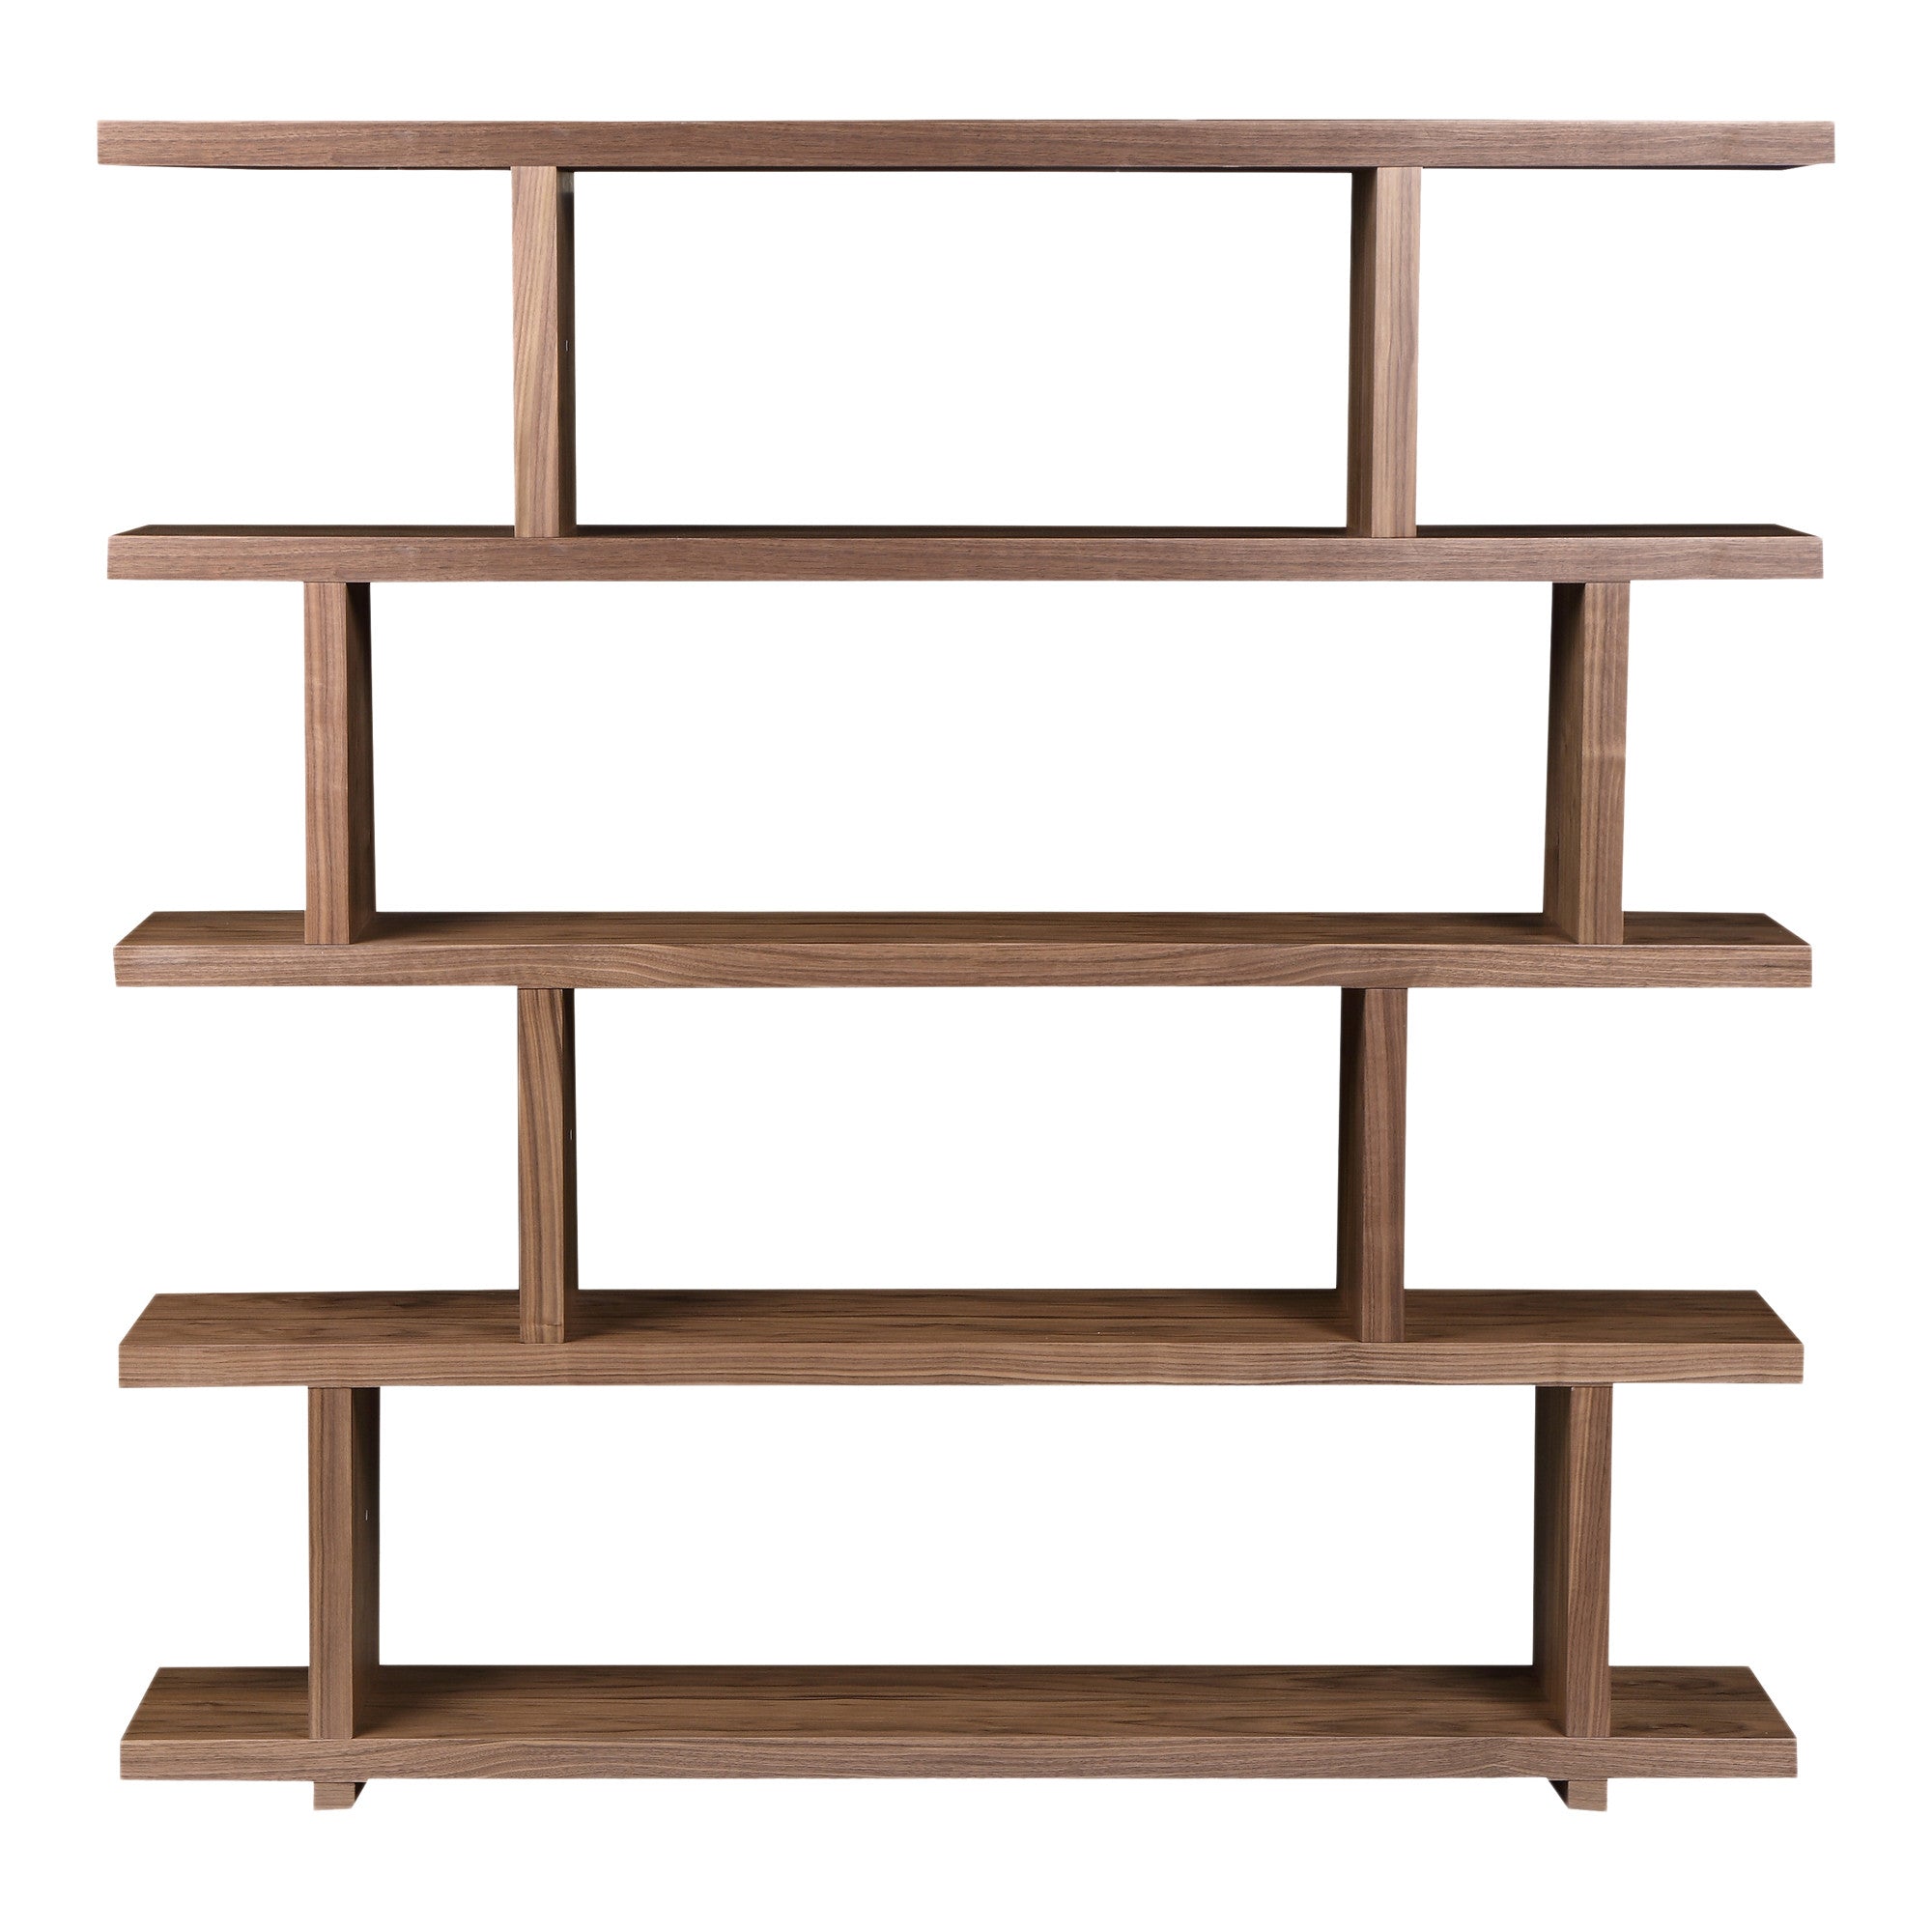 63" Natural and Brown Wood Five Tier Bookcase